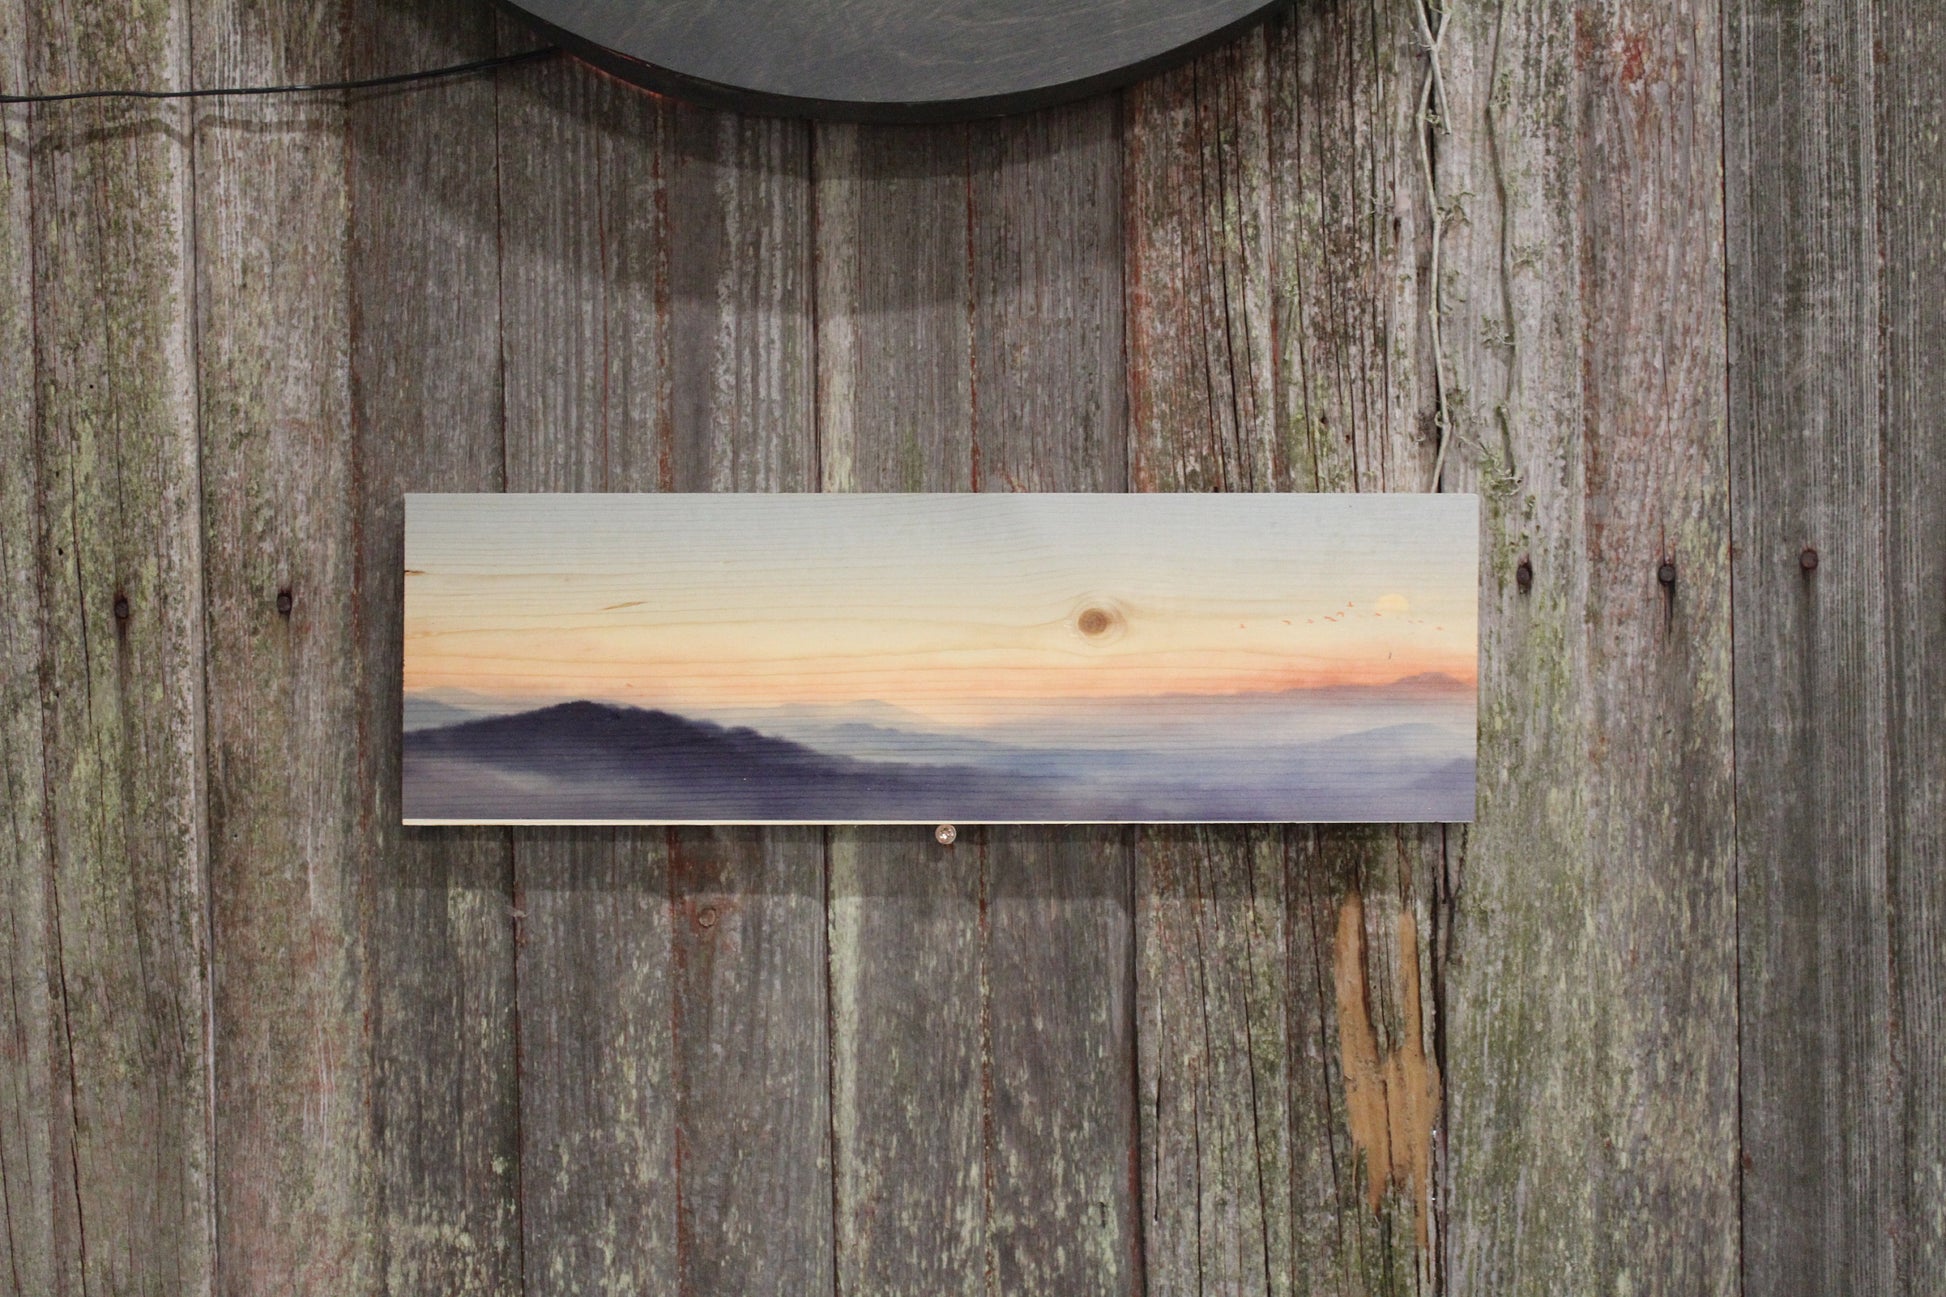 Mountain Sunset Painting Sign Wood Wall Hanging Pastel Watercolor Decor Decoration Morning Sunrise Mountain Range Art Picture